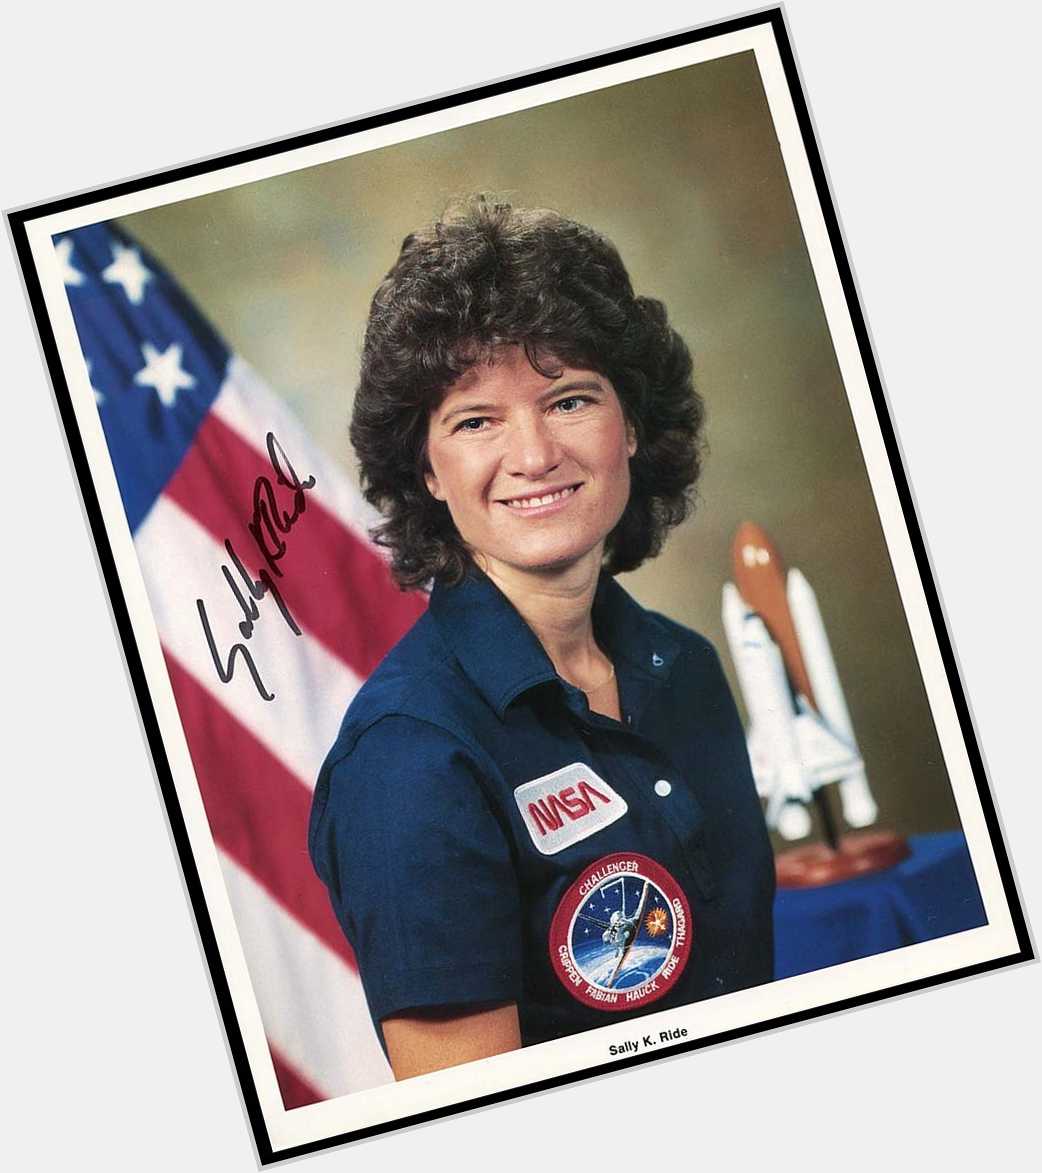 Http://fanpagepress.net/m/S/Sally Ride Hairstyle 7